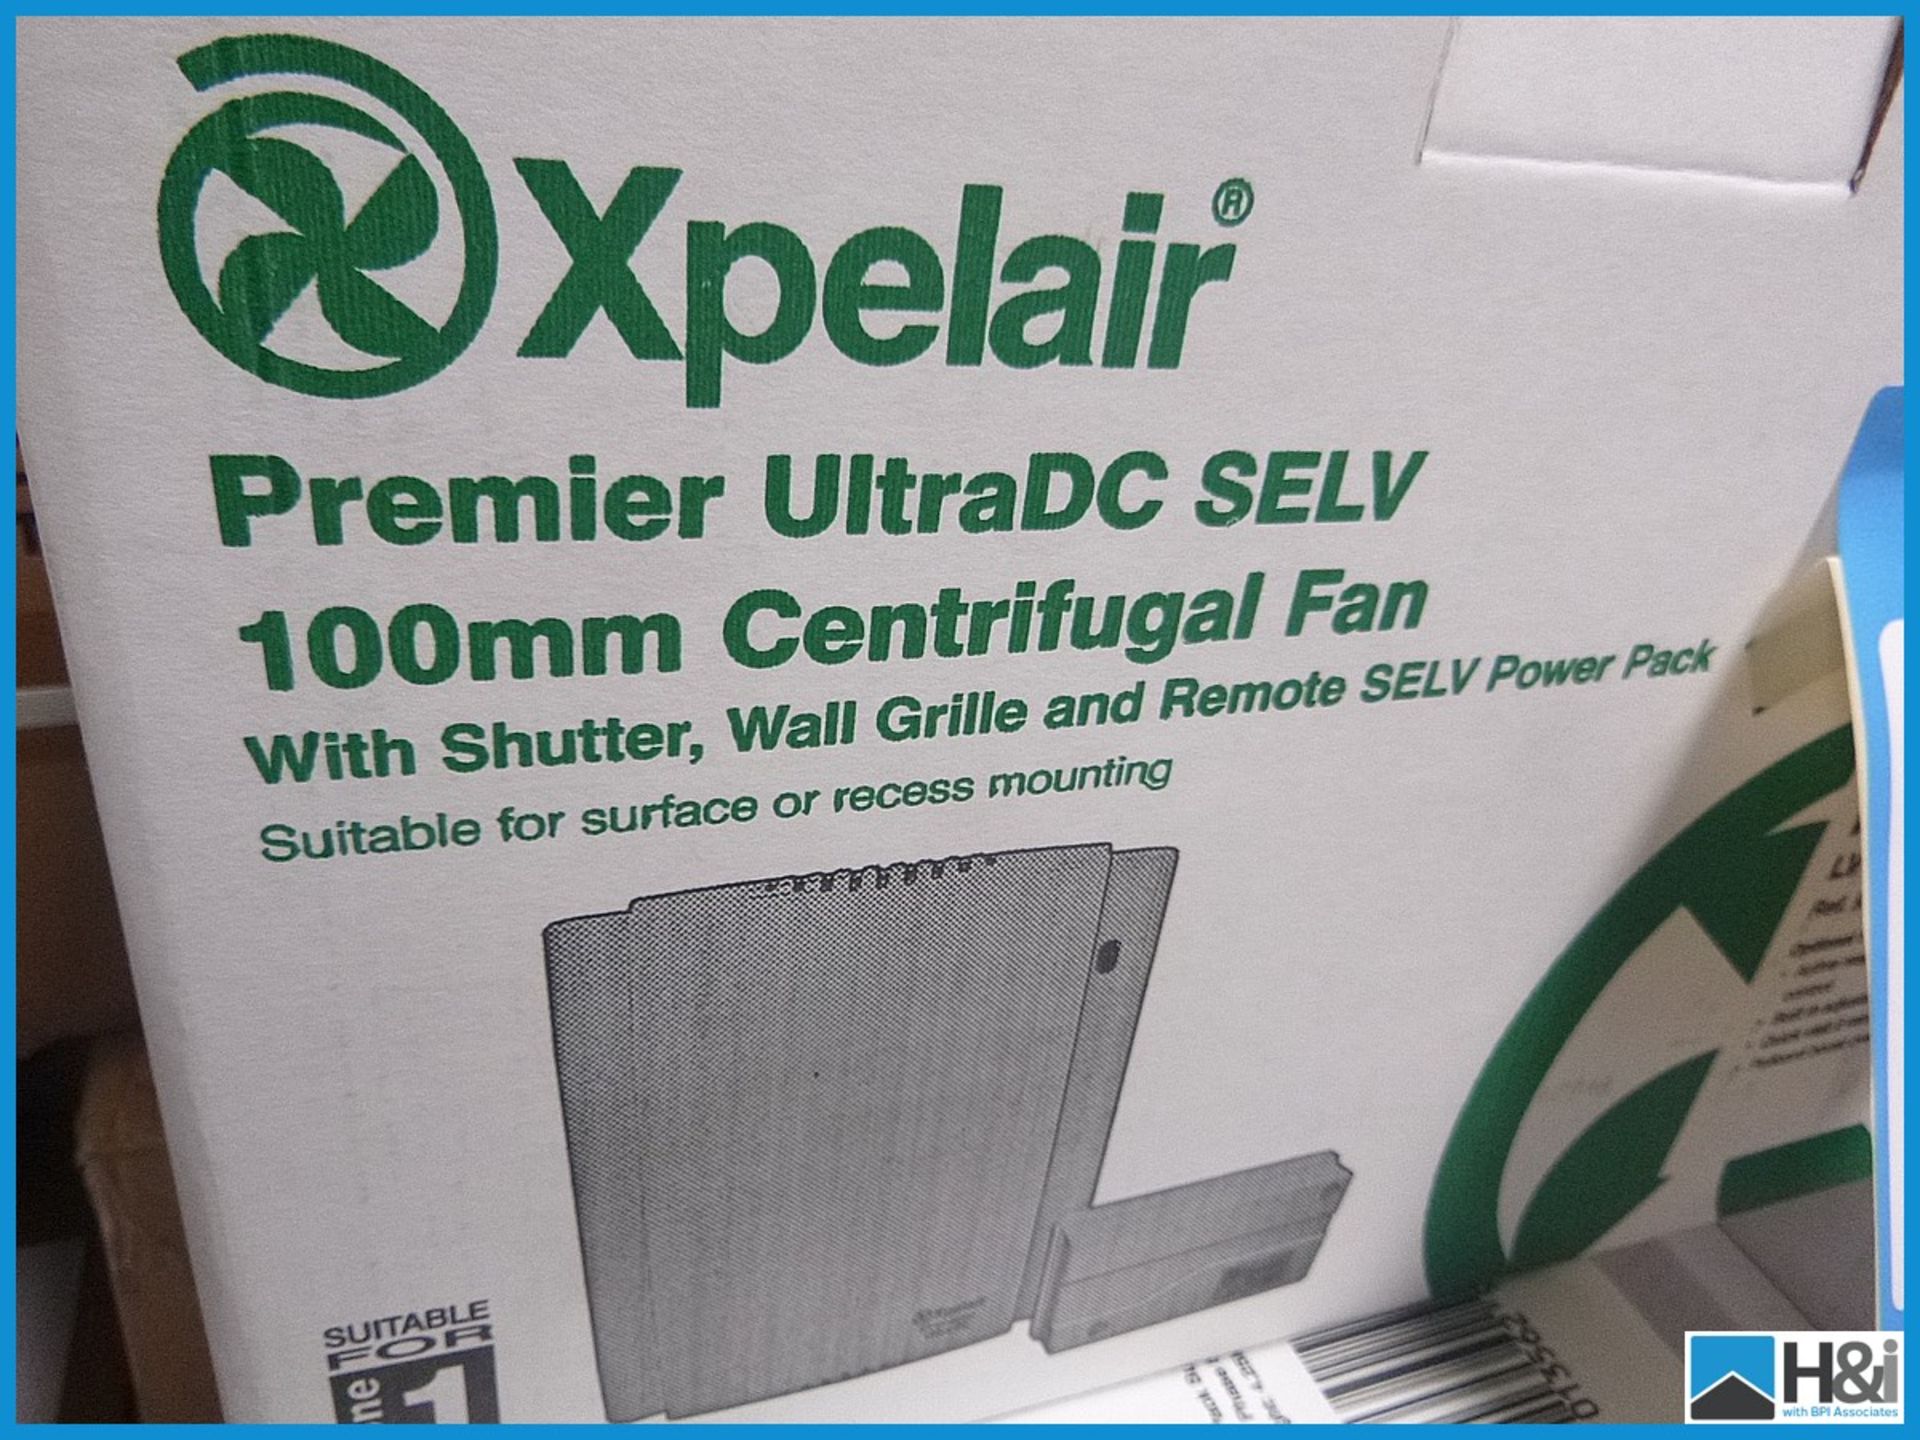 Xpelair premier UltraDC SELV 100MM centrifugal fan. New and boxed RRP £129 Appraisal: Viewing - Image 2 of 2